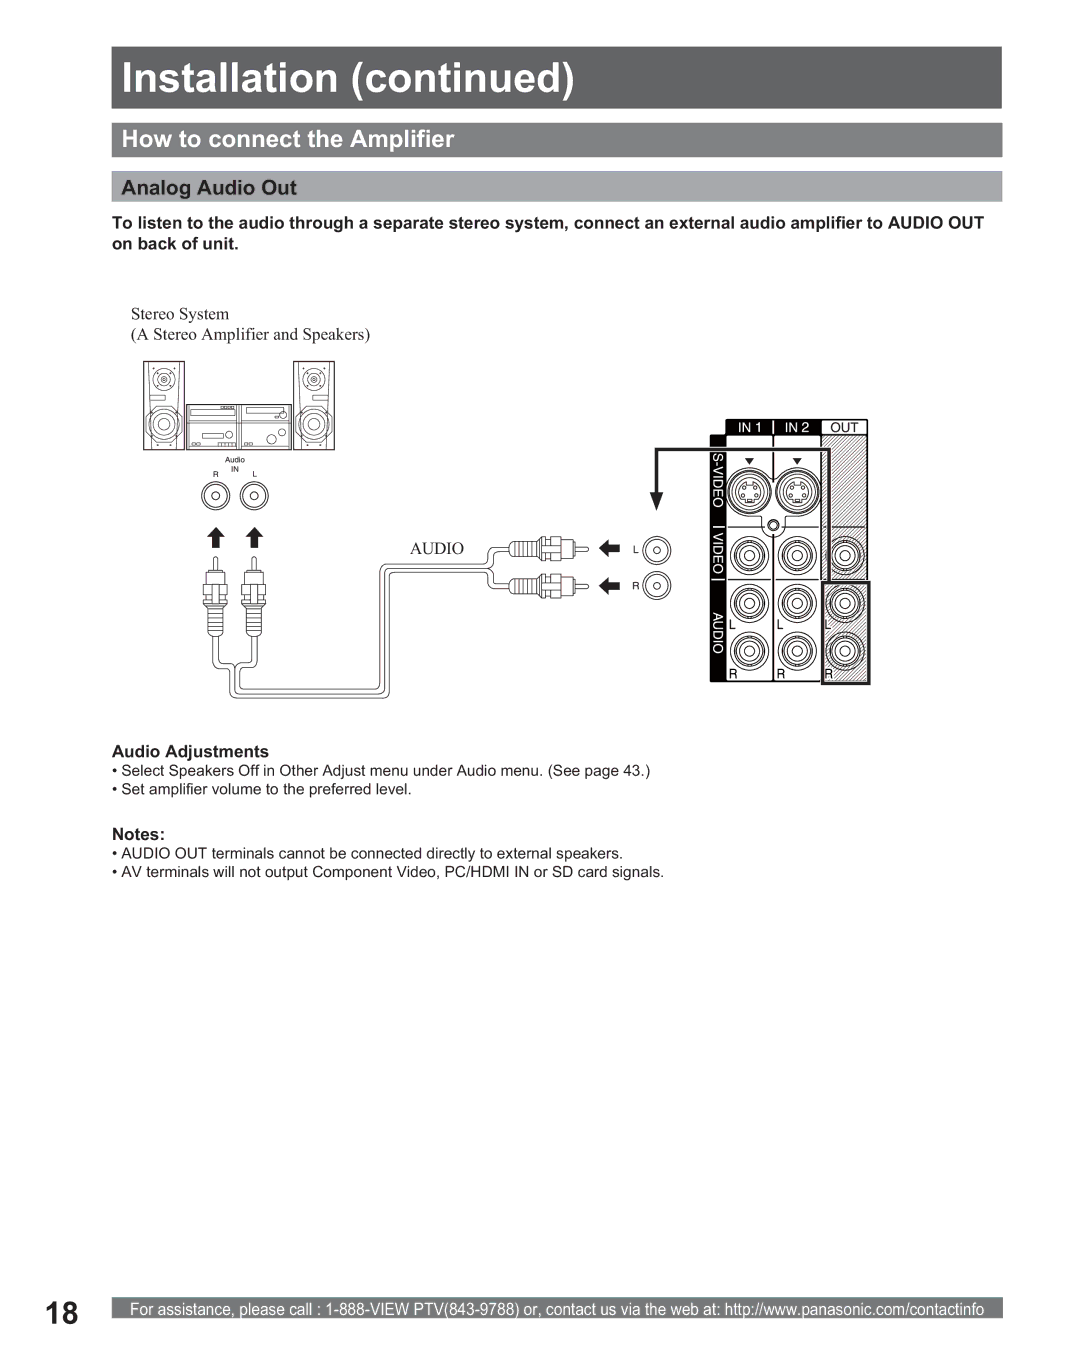 Panasonic PT 56DLX75 manual How to connect the Amplifier, Analog Audio Out, Stereo System Stereo Amplifier and Speakers 